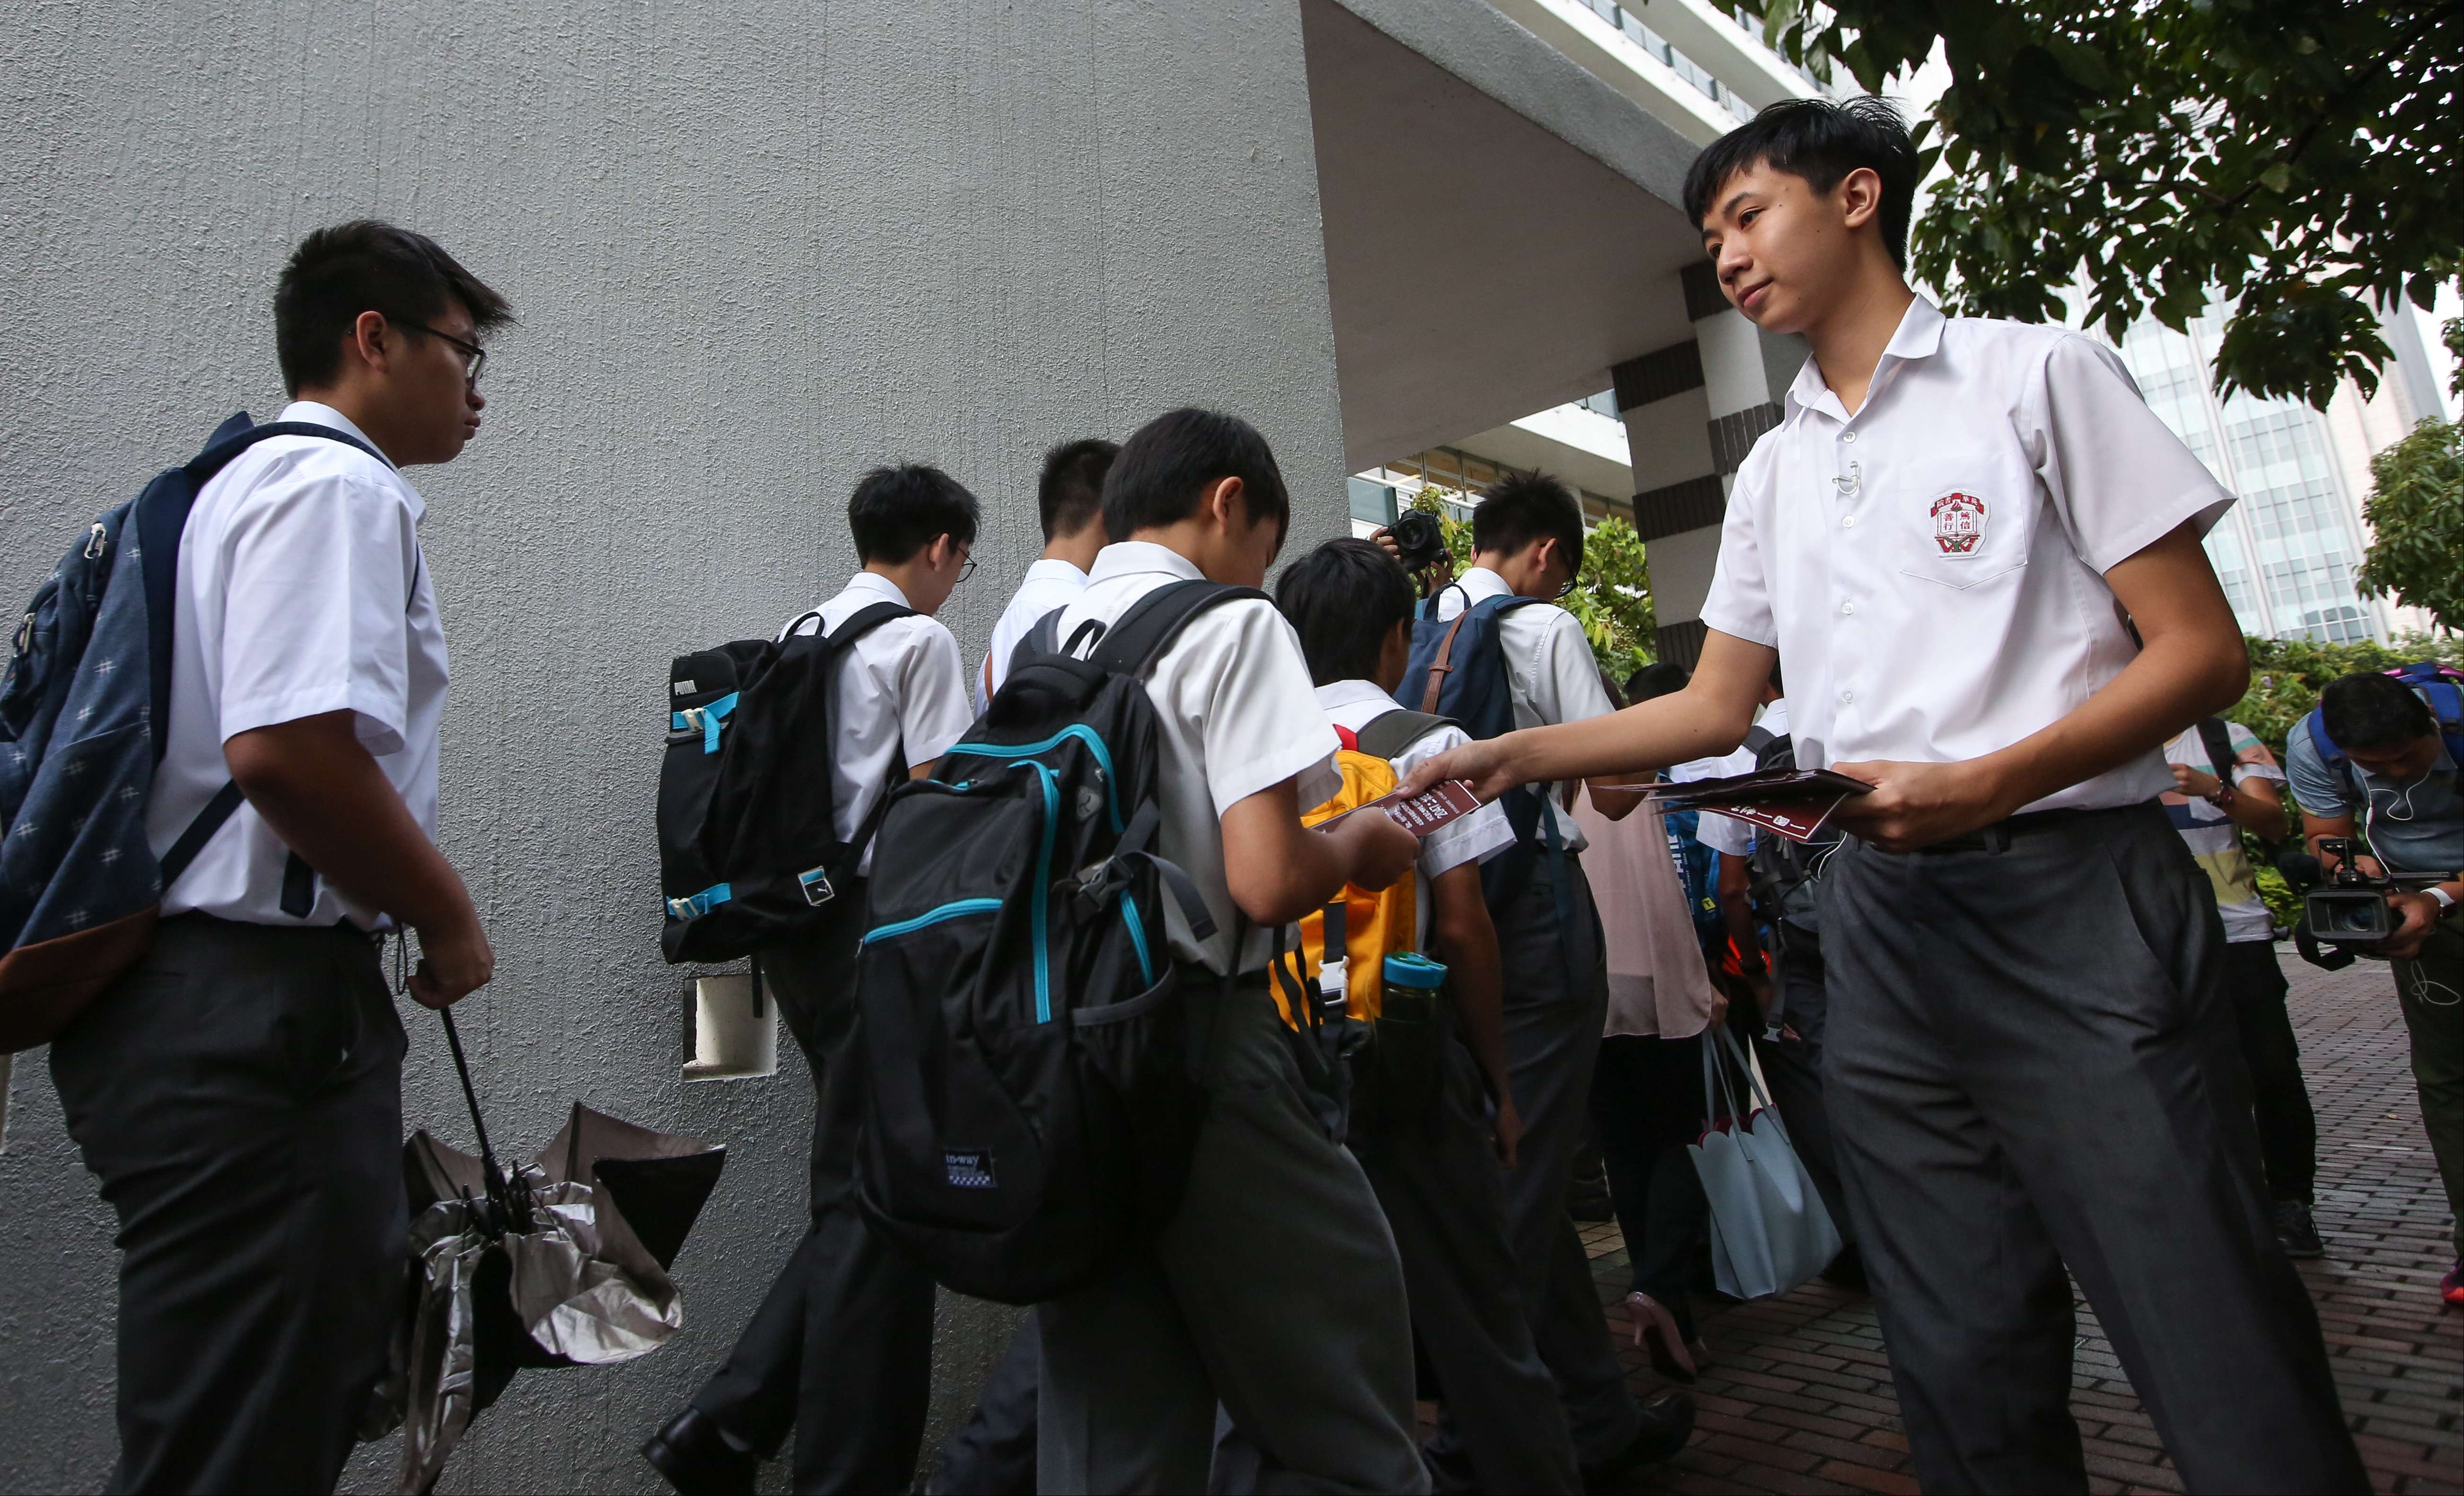 A student from Ying Wa College hands out leaflets on Hong Kong independence on the first day of school. Photo: Edward Wong